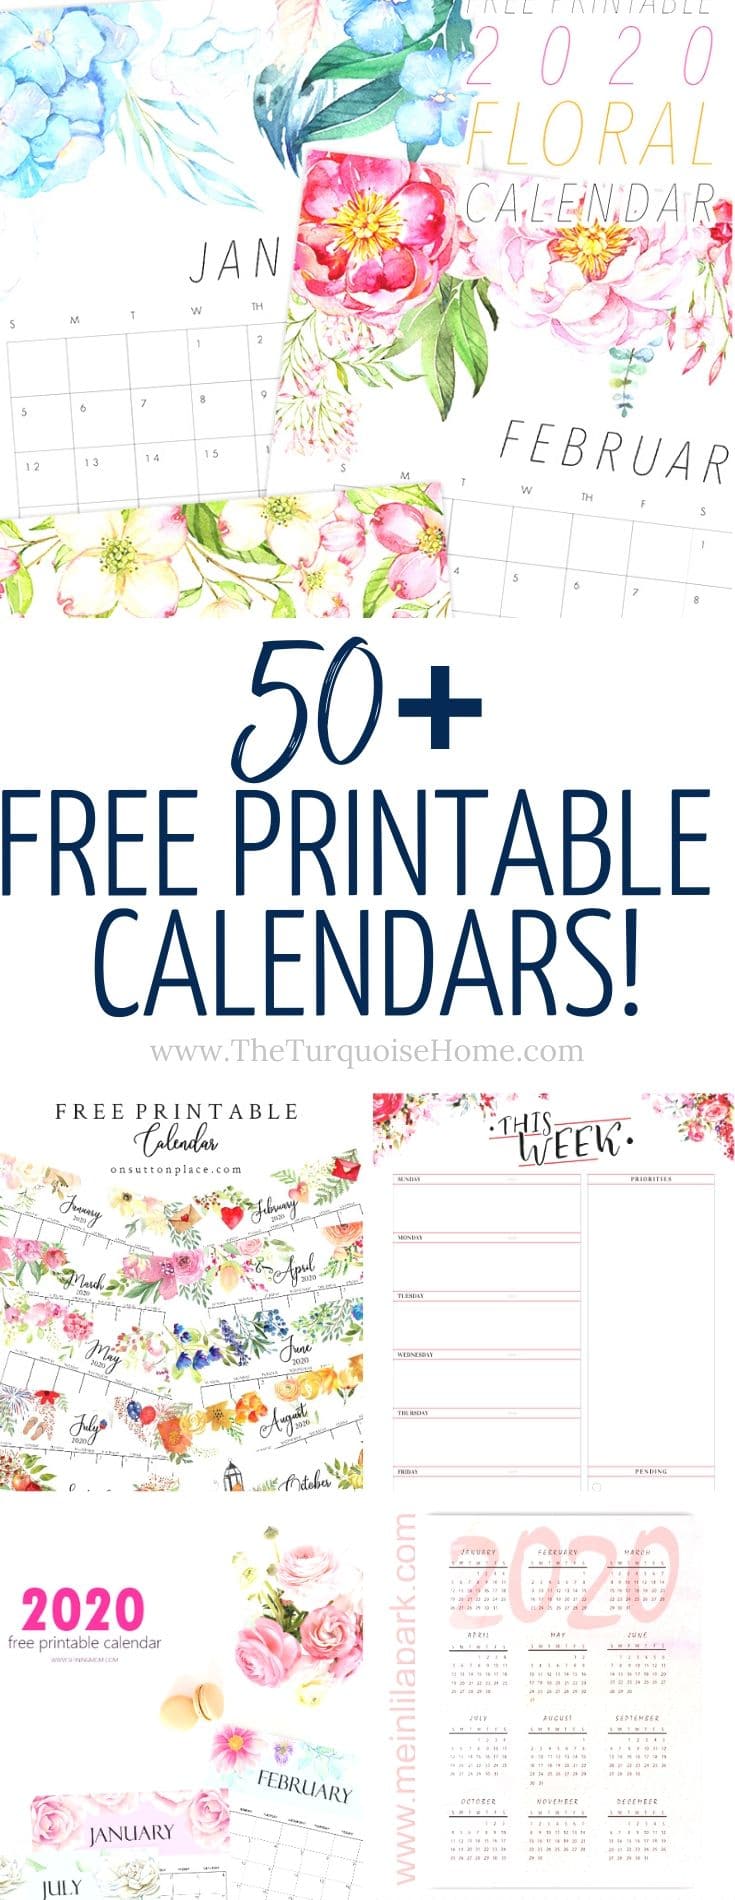 50+ Free Printable Calendars for 2020 | The Turquoise Home - 735 x 1900 jpeg 155kB